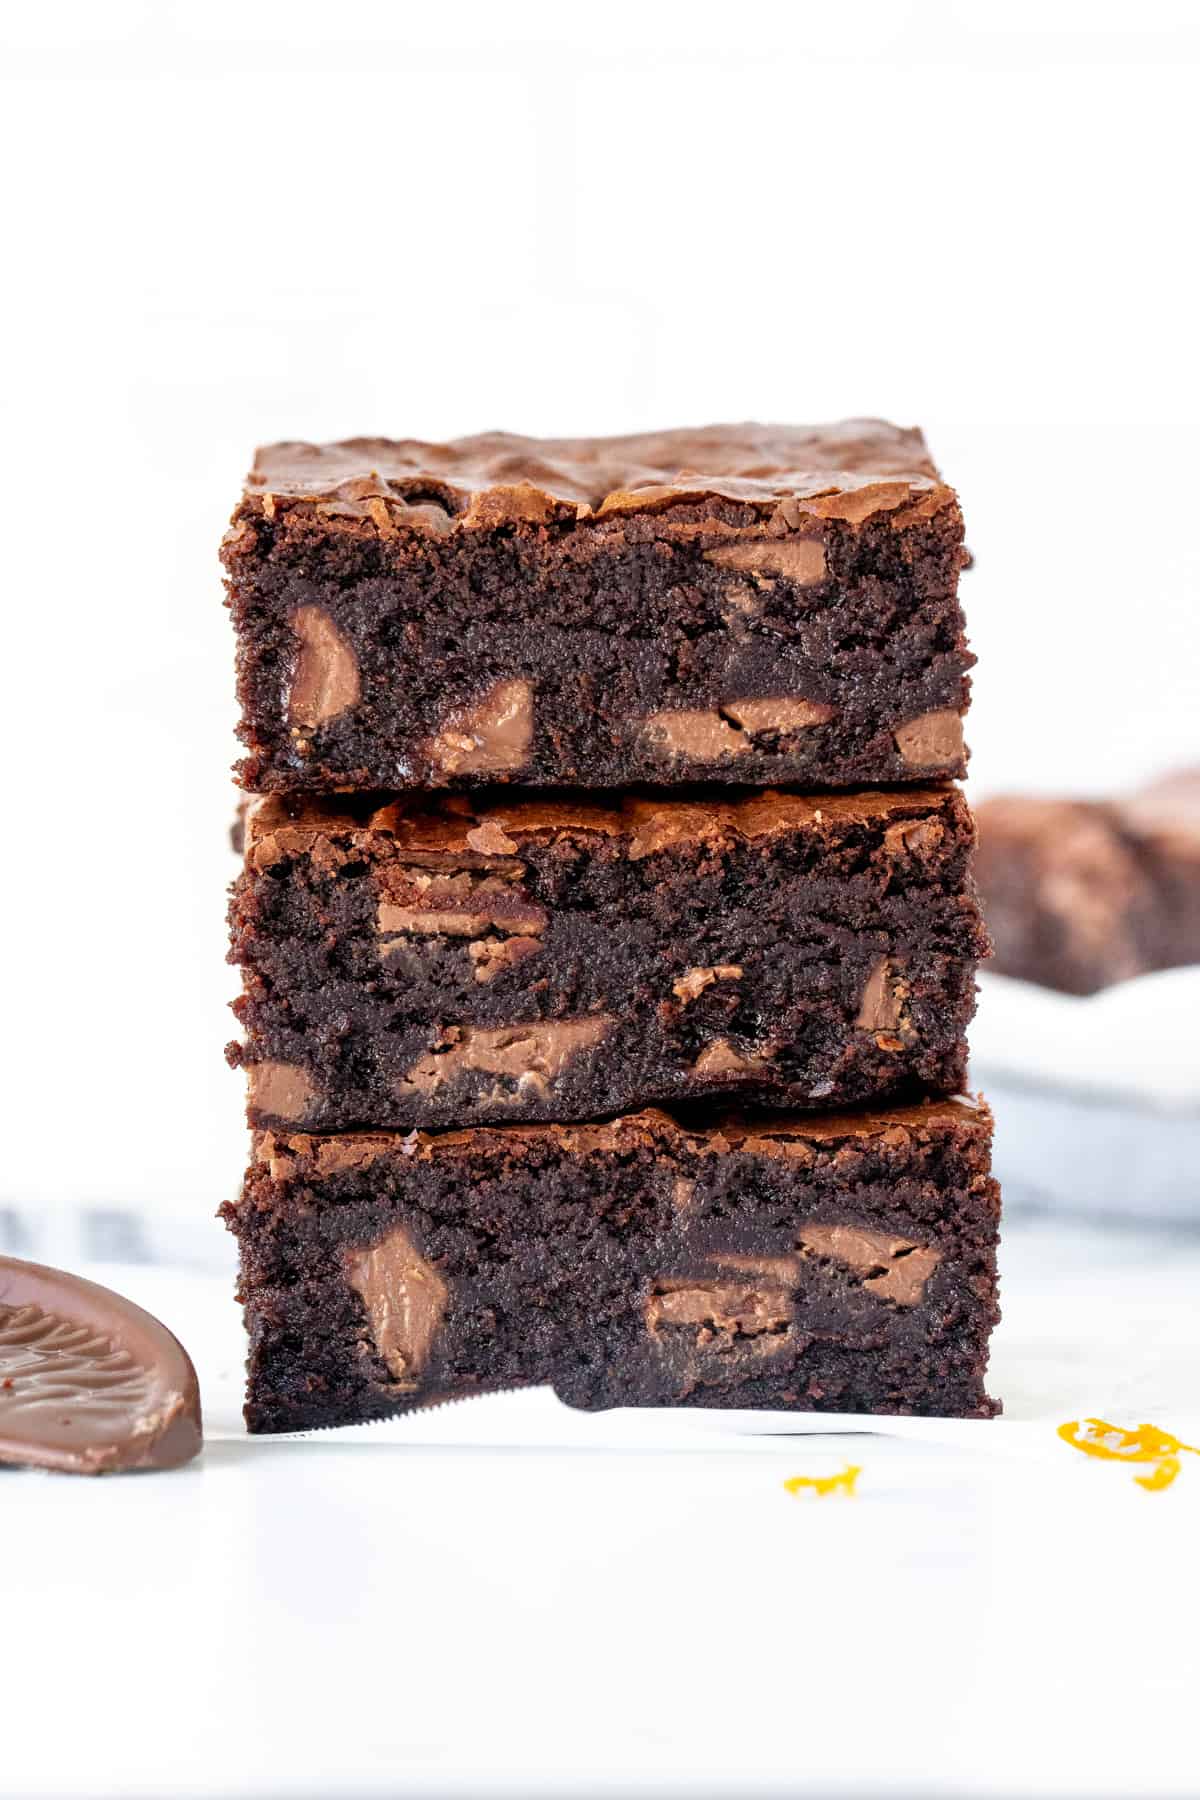 Stack of three chocolate orange brownies, one on top of each other